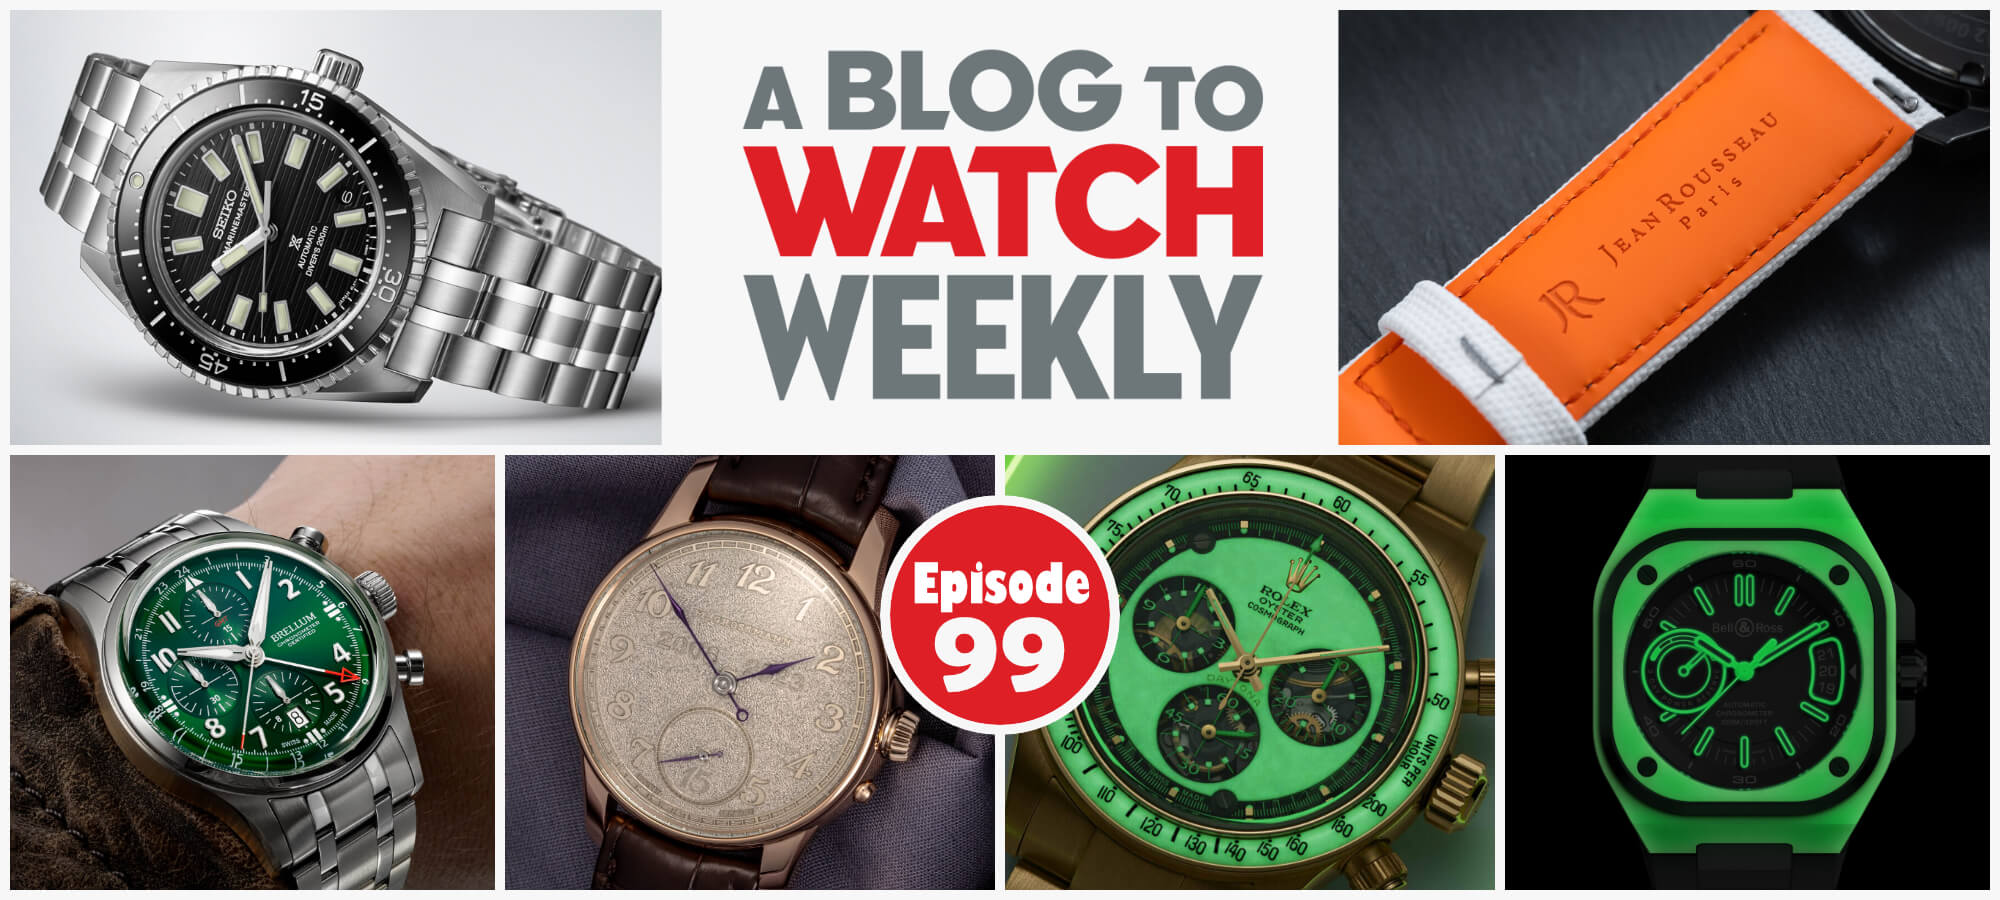 aBlogtoWatch Weekly Episode 99